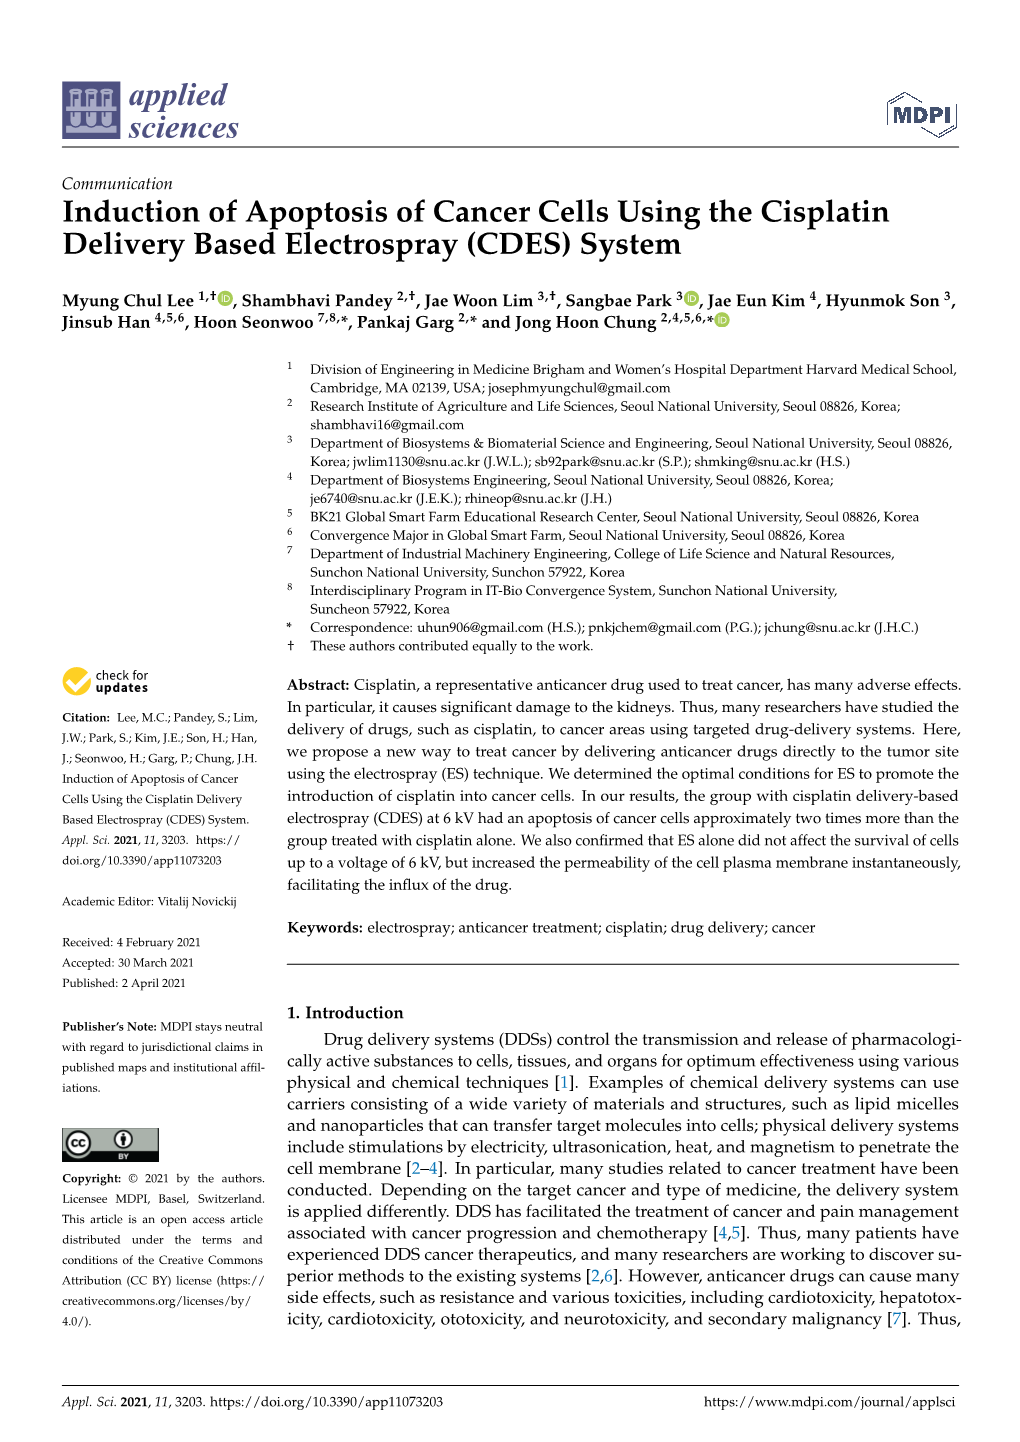 Induction of Apoptosis of Cancer Cells Using the Cisplatin Delivery Based Electrospray (CDES) System